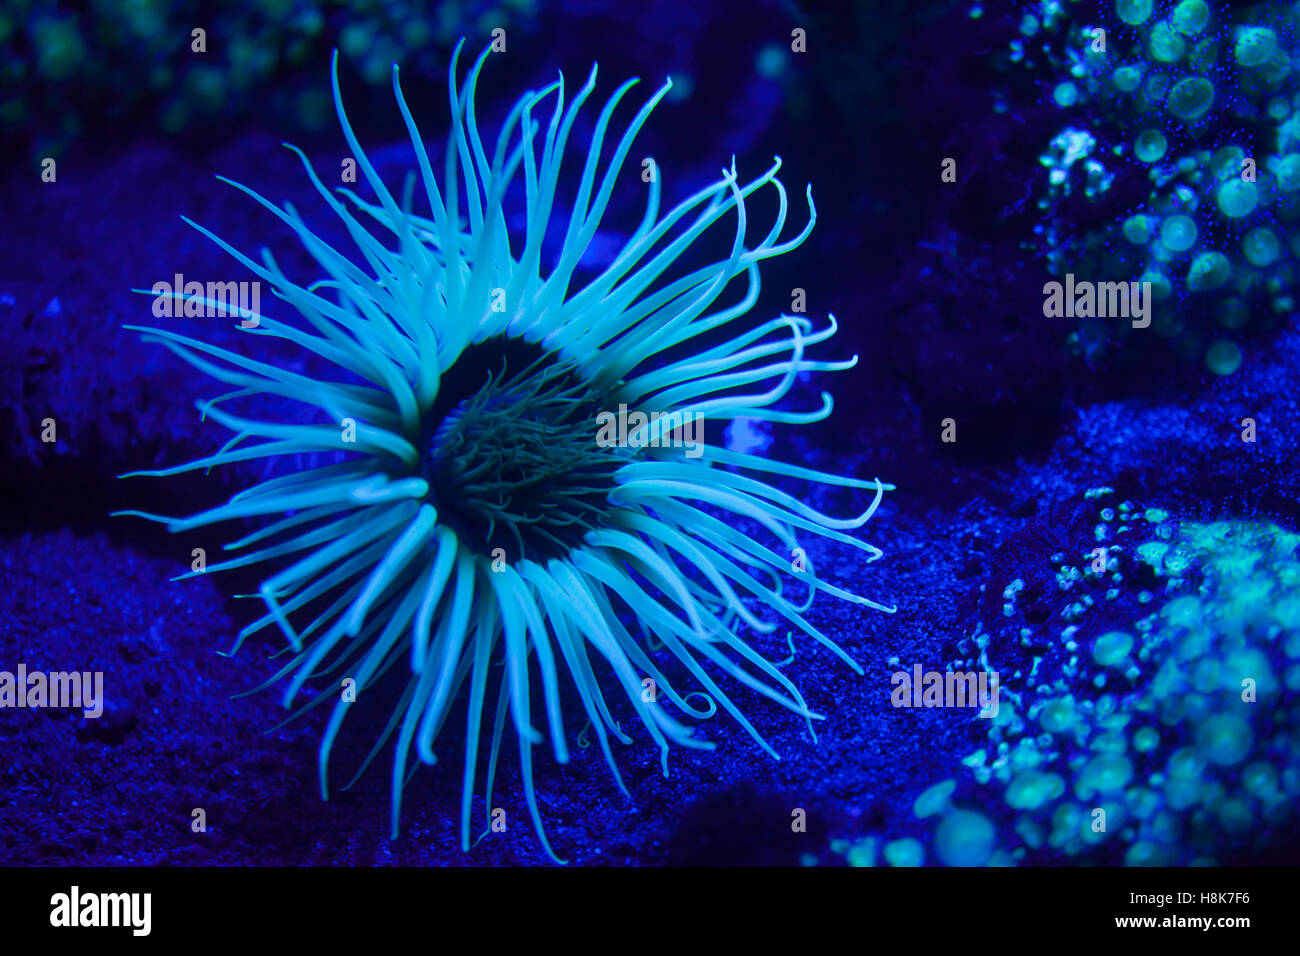 Cylinder anemone (Cerianthus membranaceus), also known as the coloured tube anemone. Stock Photo